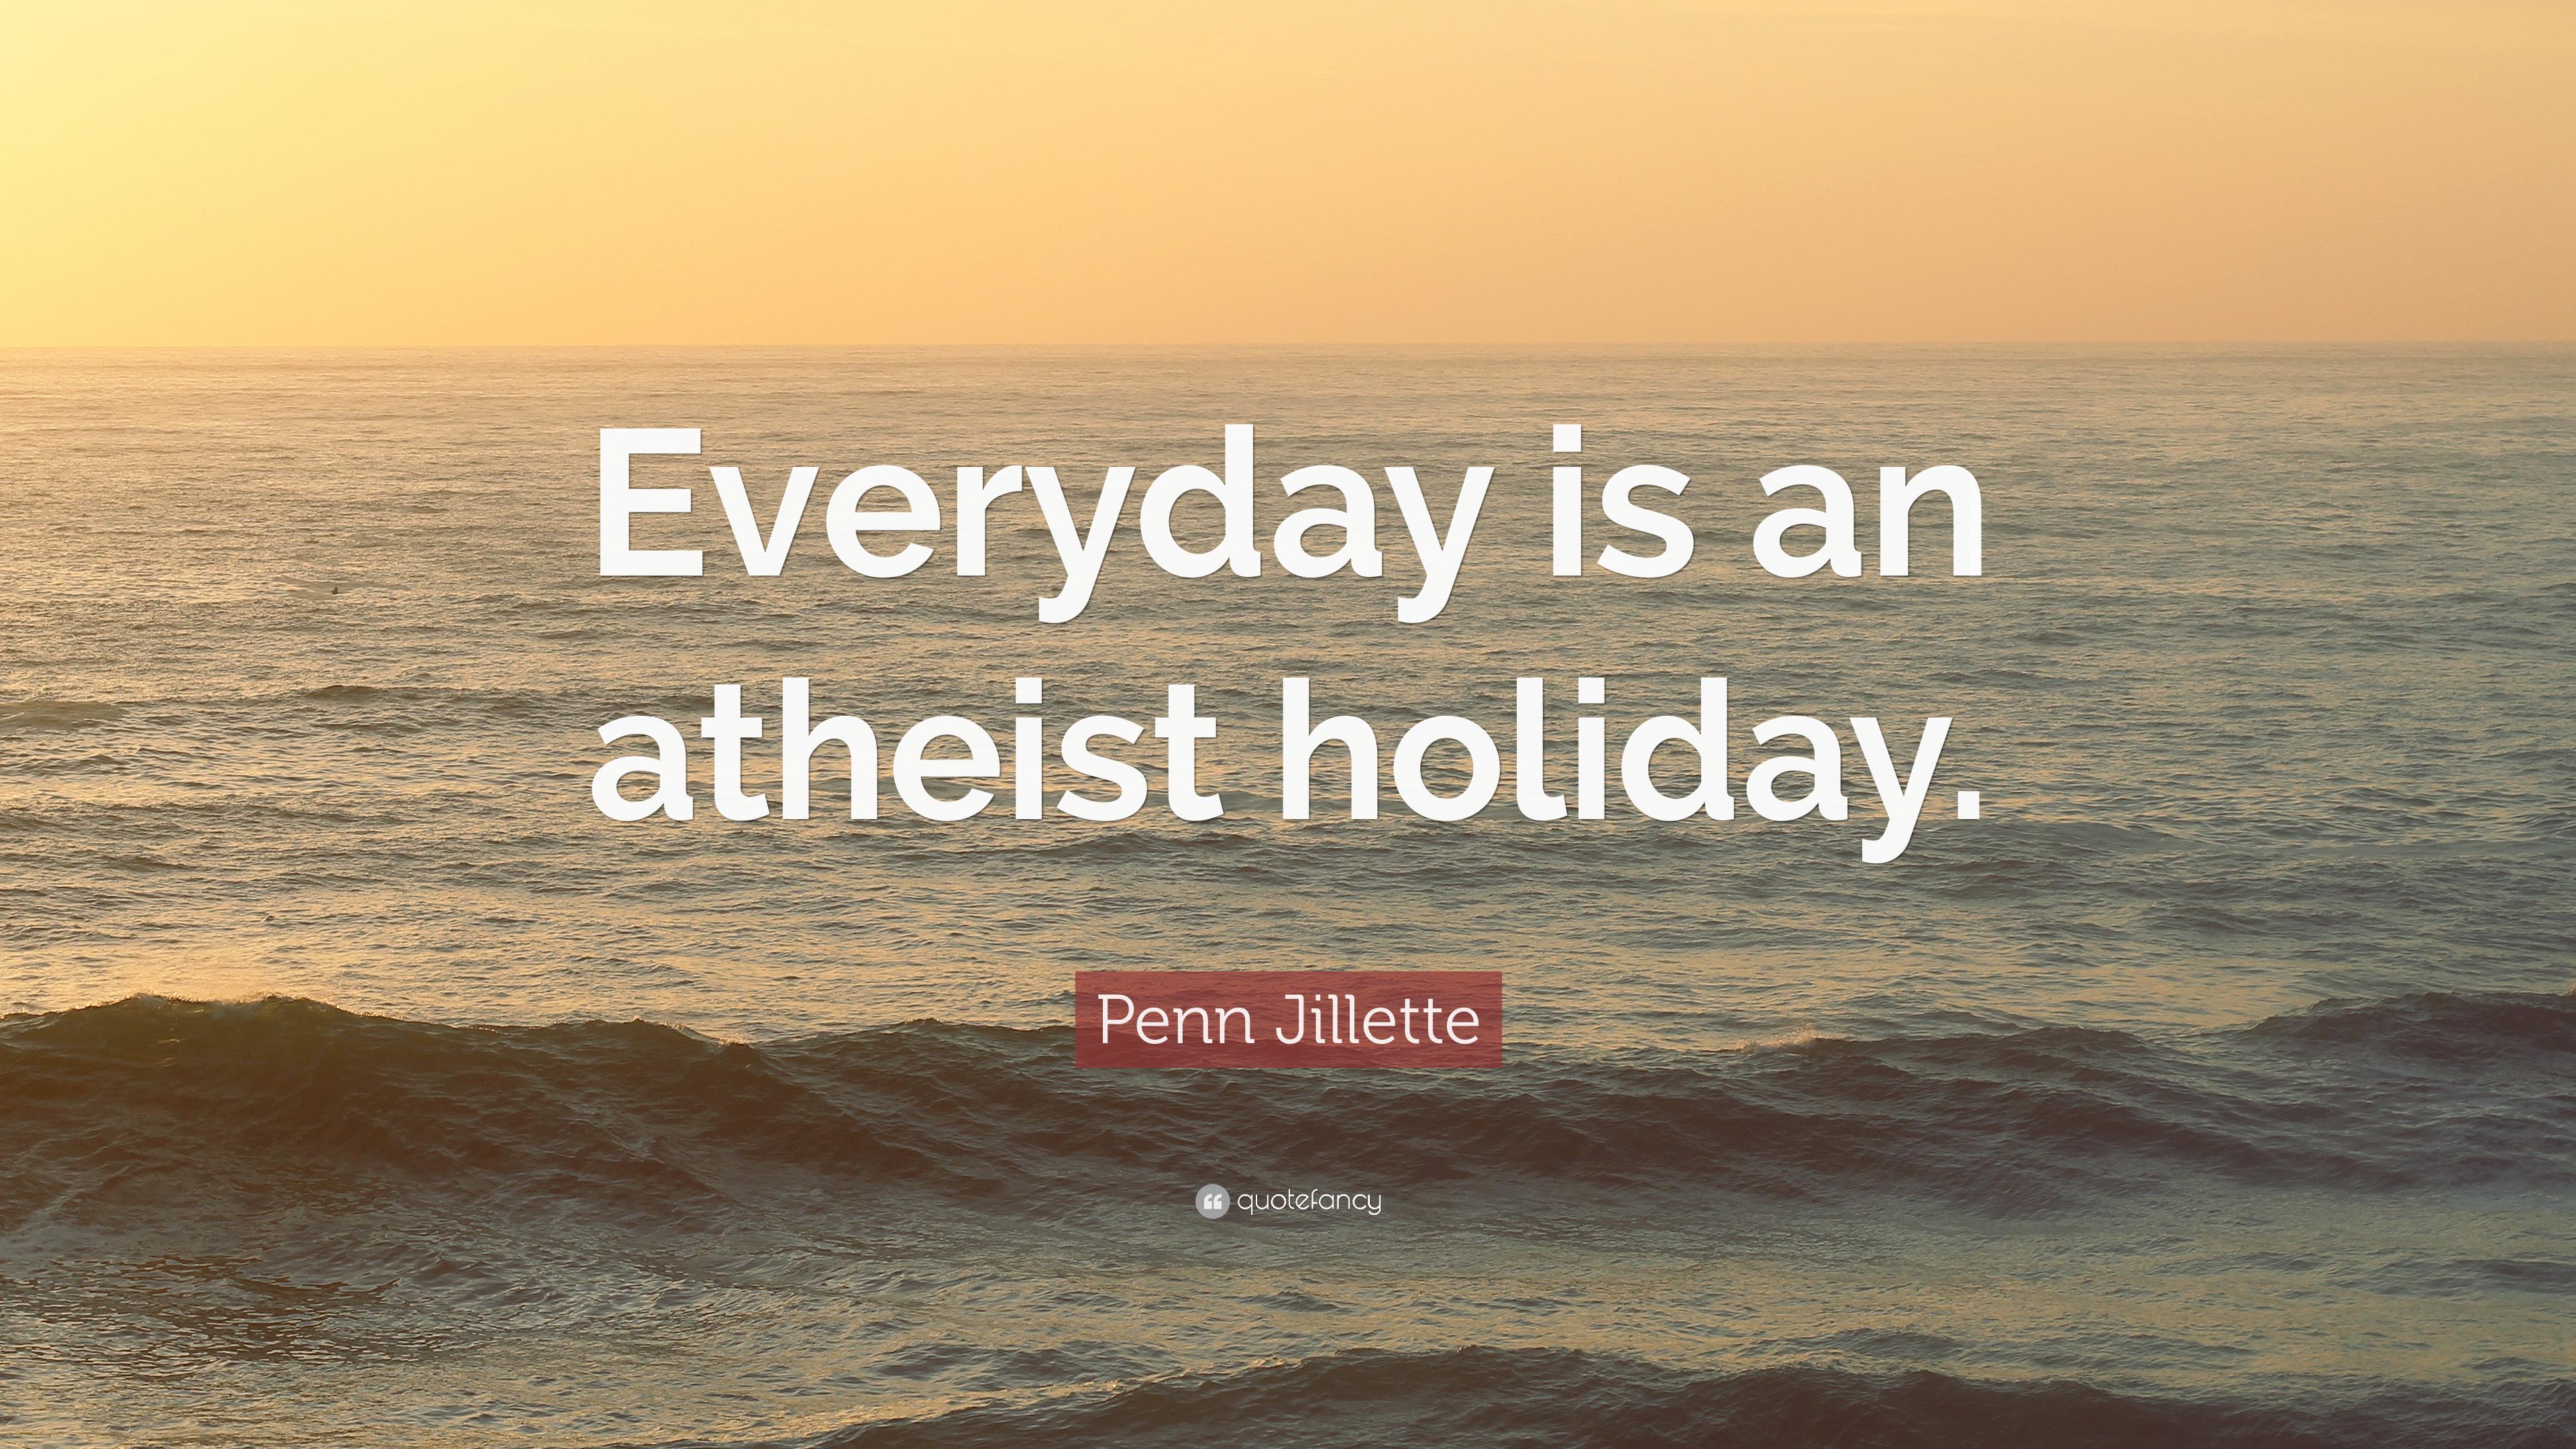 Penn Jillette Quote: “Everyday is an atheist holiday.” 7 wallpaper